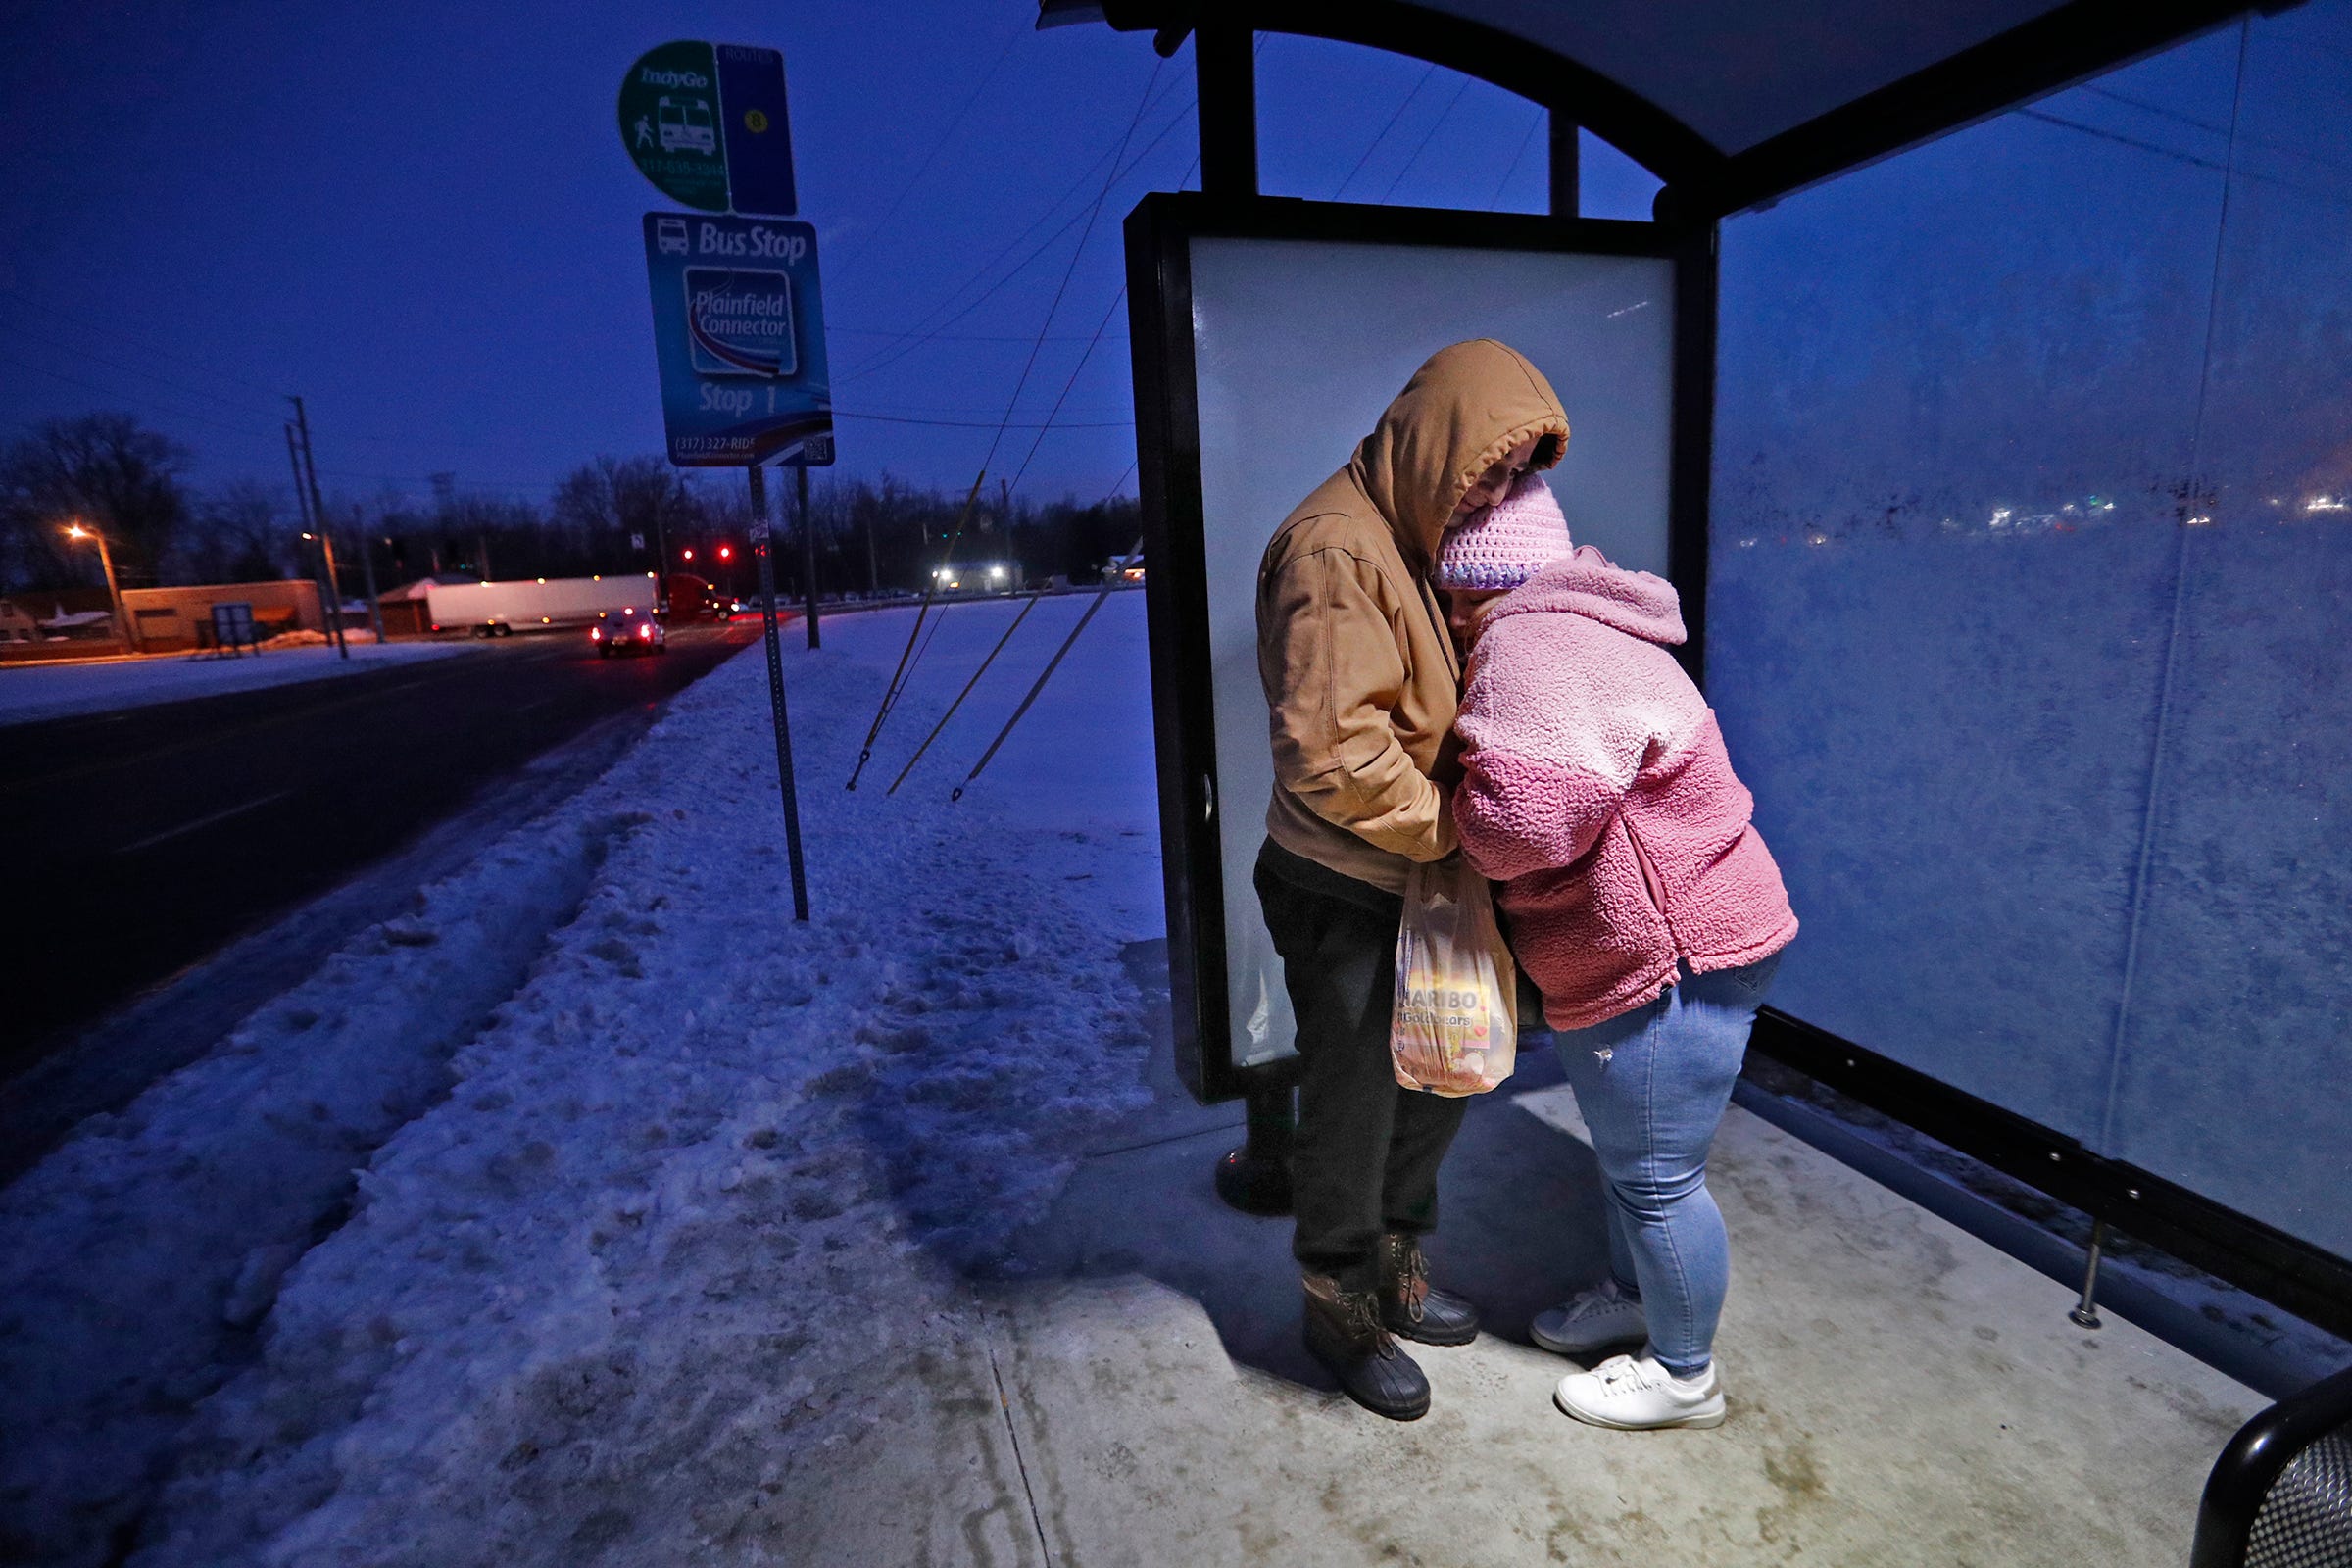 Sulaman and Arzo Akbarzada try to stay warm as they wait for their Uber on their way to work at Harlan Bakeries, Monday, Feb. 7, 2022 from Indianapolis to Avon. This day, the young couple took two buses and an Uber to get from Indianapolis to Avon for work.